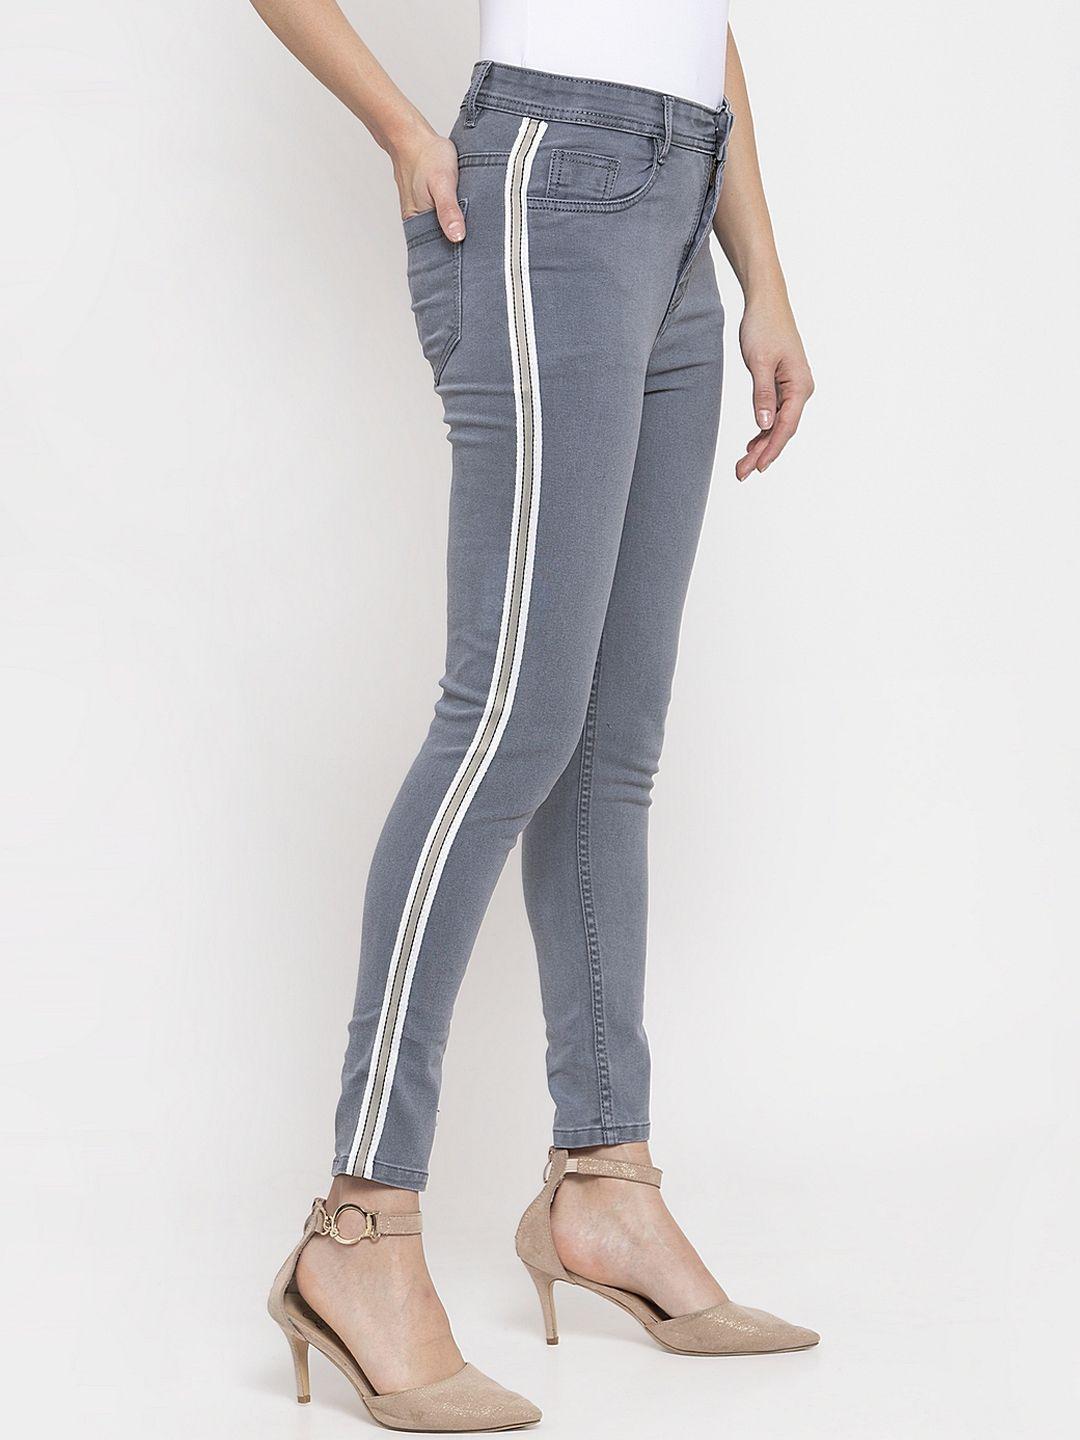 kassually women grey skinny fit mid-rise clean look jeans with side stripes